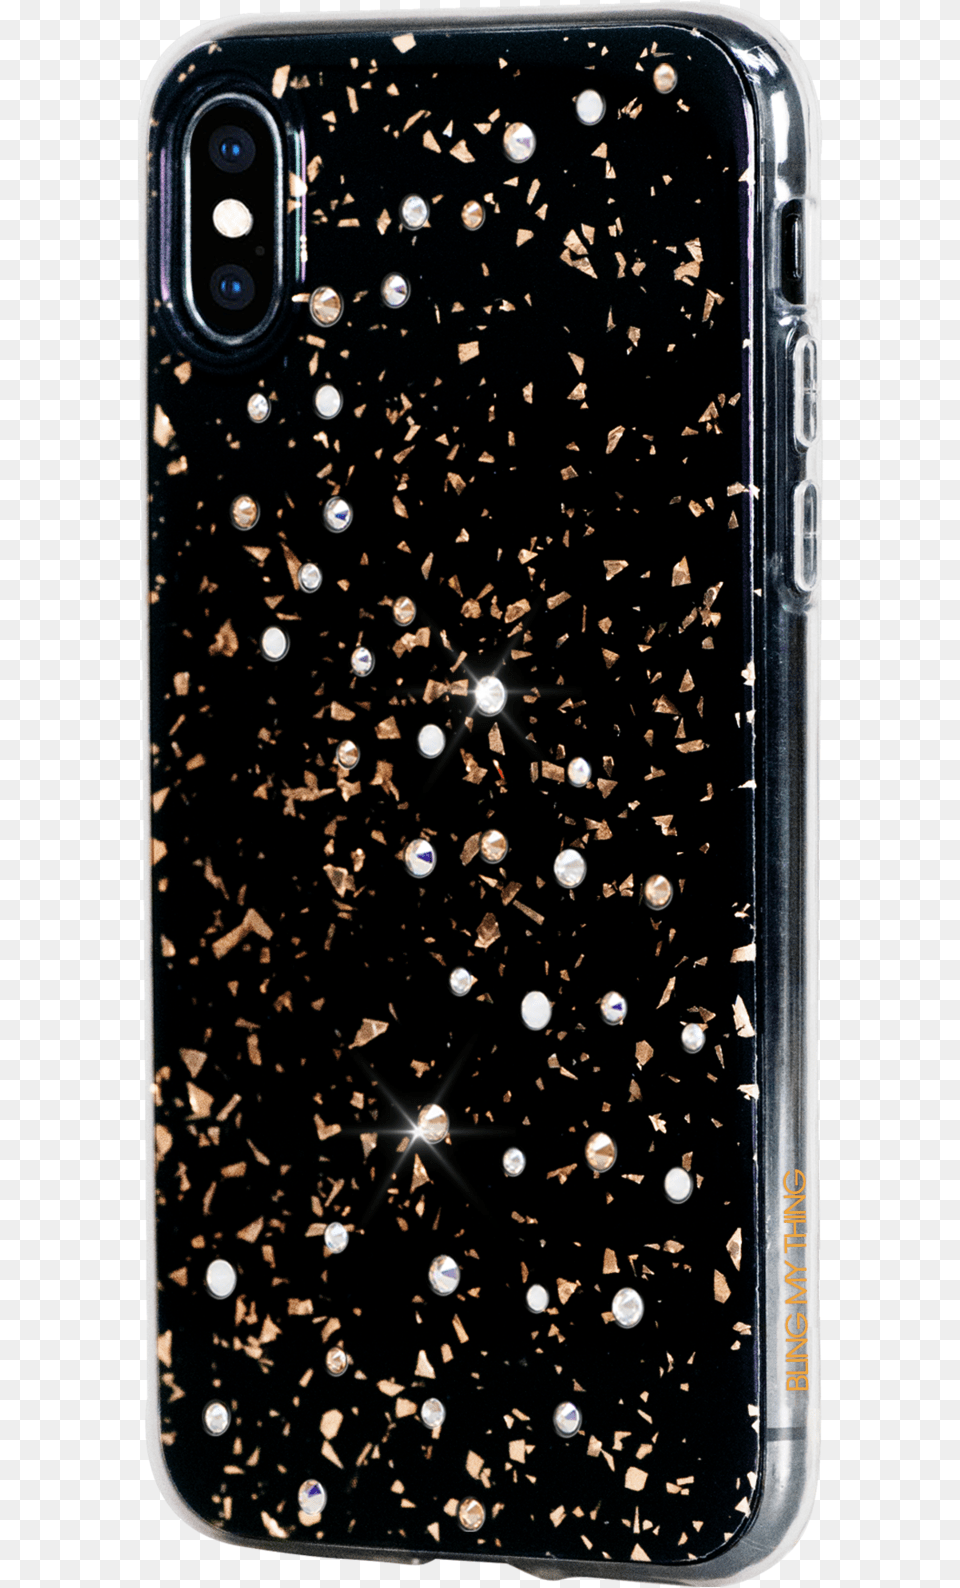 For Iphone Xs Max Iphone Xs, Electronics, Mobile Phone, Phone Png Image